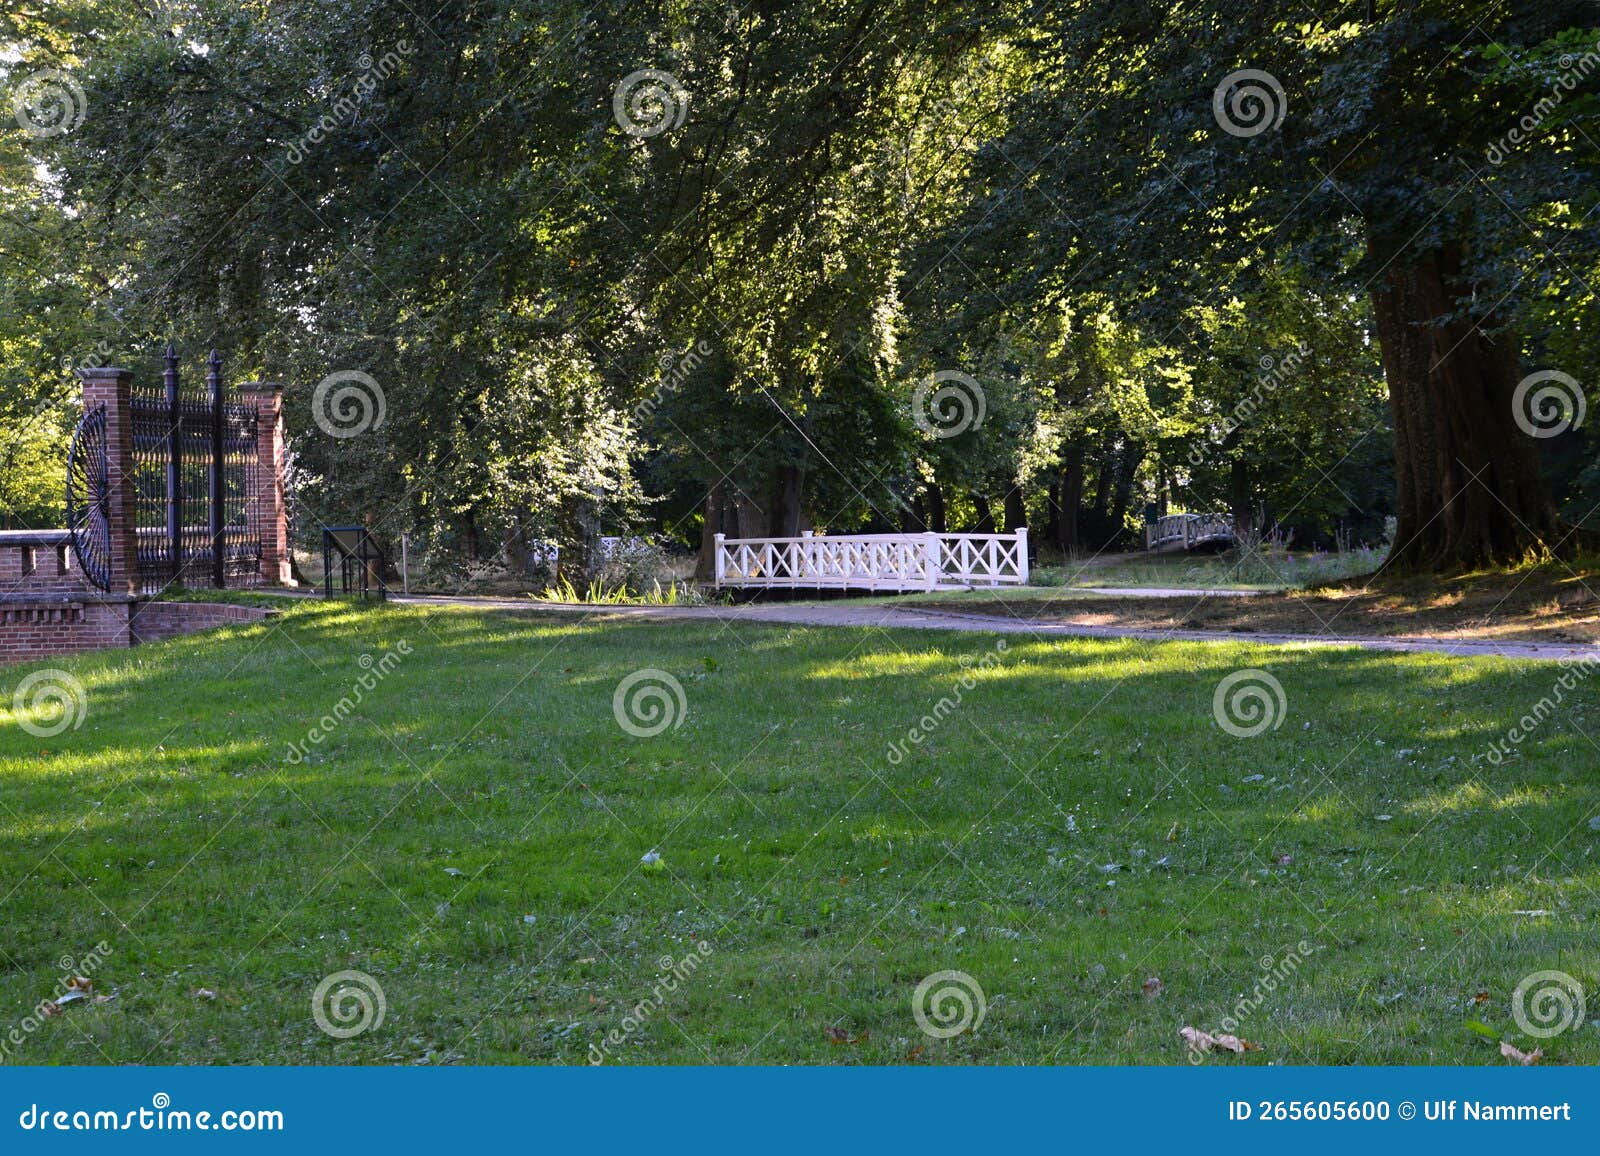 park at the historical castle evenburg in the town loga, leer, east frisia, lower saxony